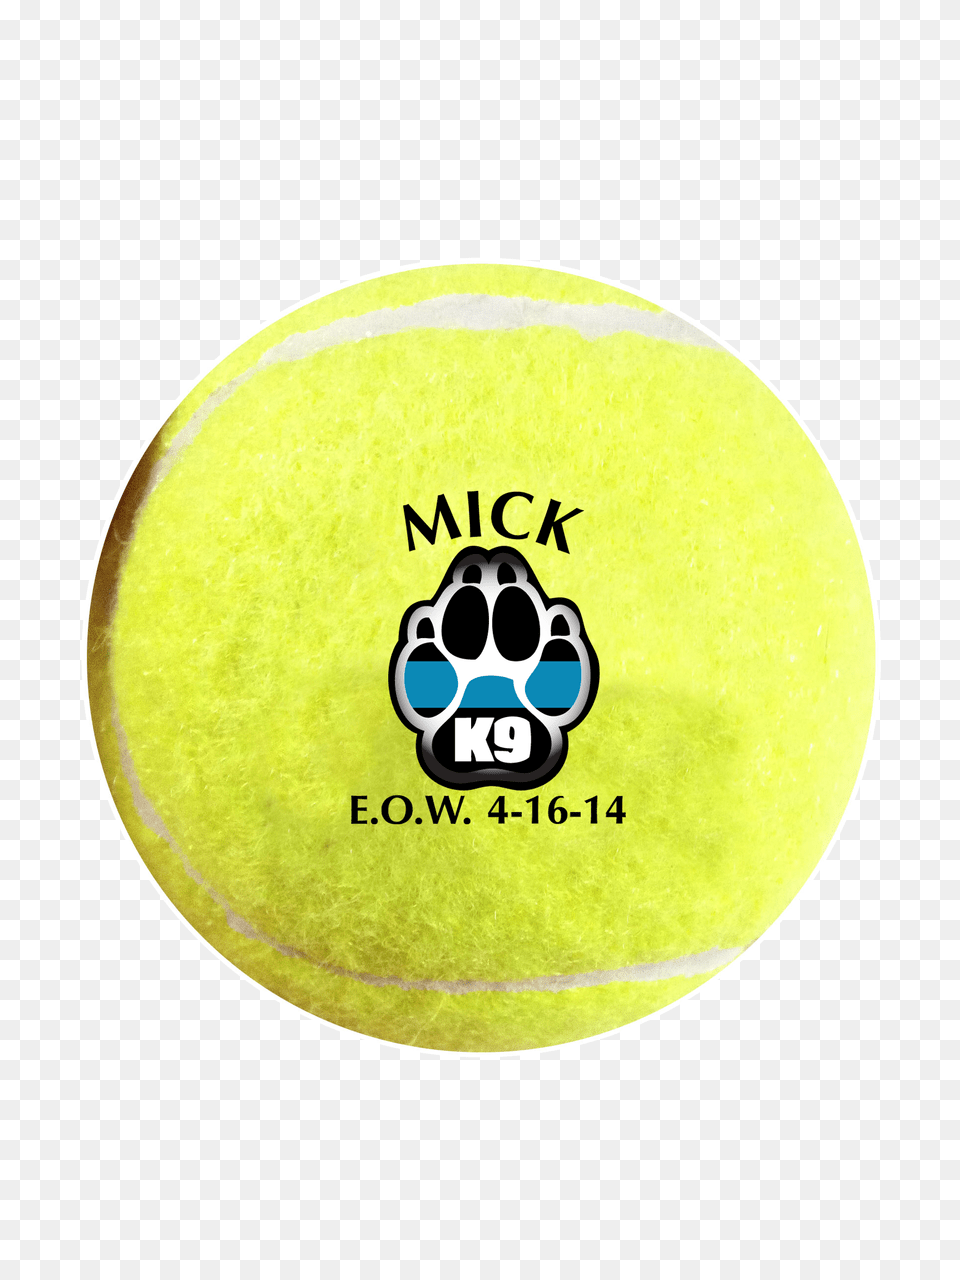 Download Thin Blue Line Imprint Only Circle With K9 Decal, Ball, Sport, Tennis, Tennis Ball Png Image